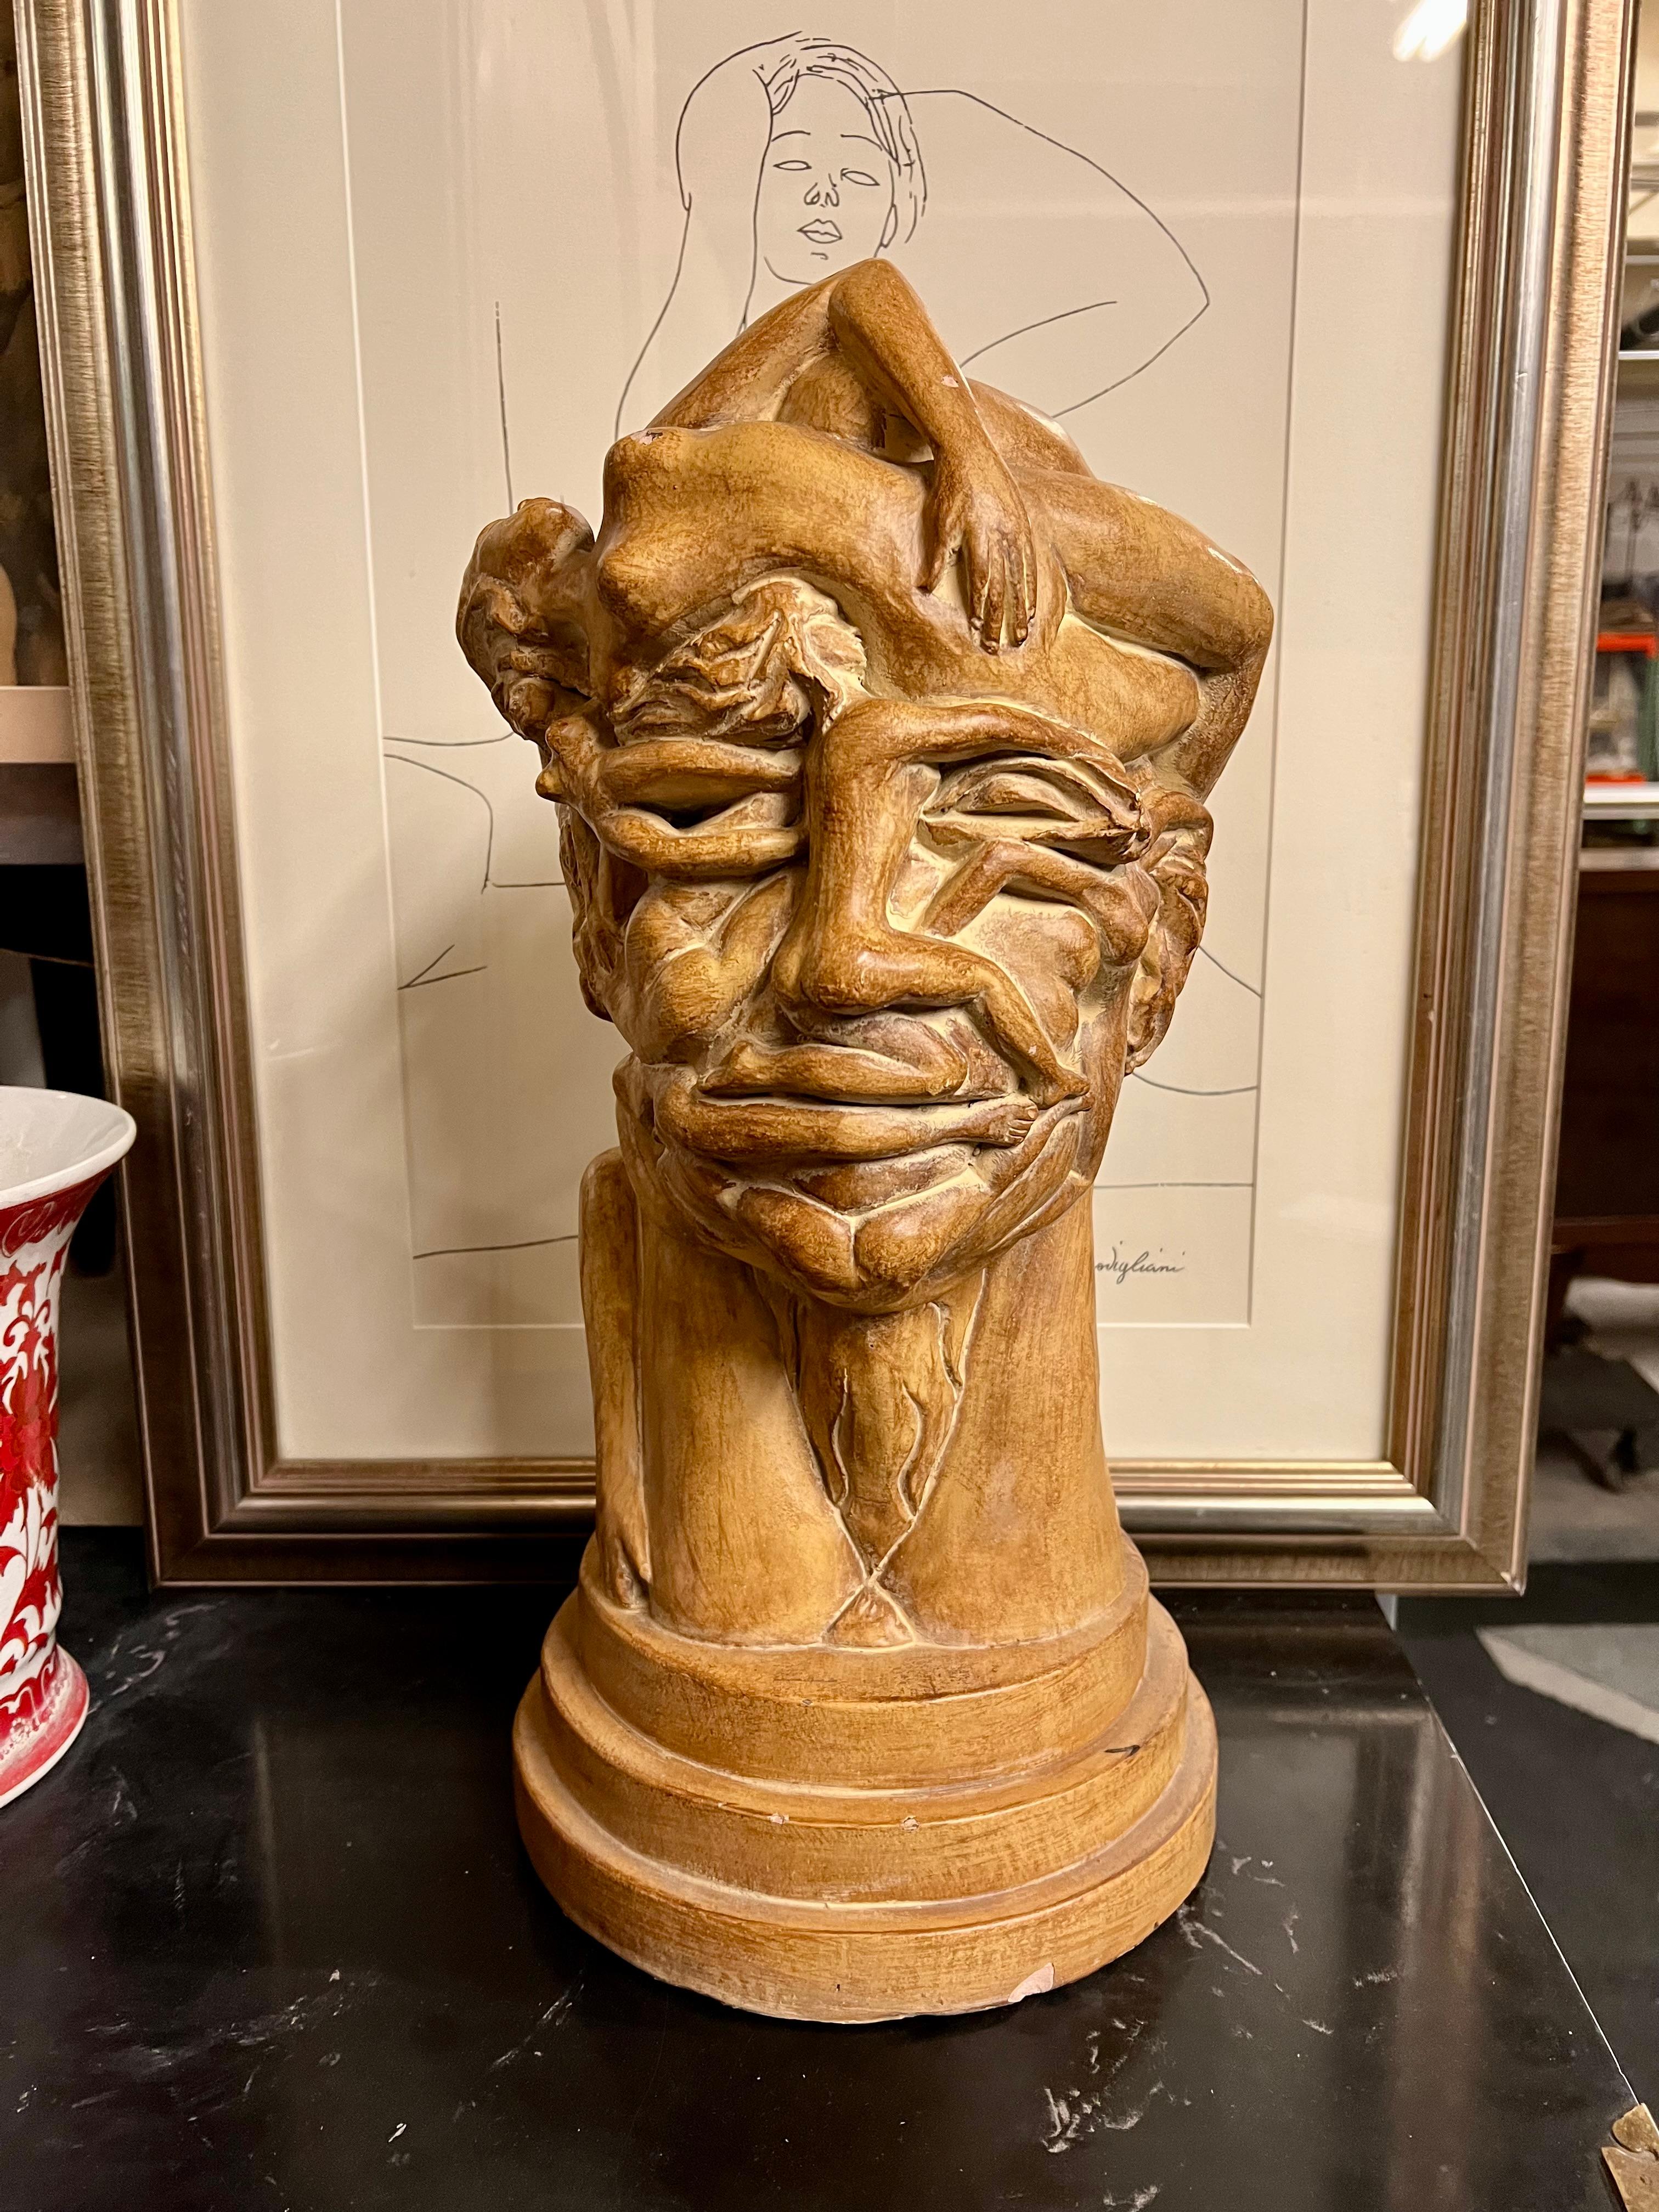 Glazed ceramic sculpture of a face, rendered as a collection of bodies. A unique and philosophical piece for any room. Sits on a base of 3-tier pedestals and measures 20.5